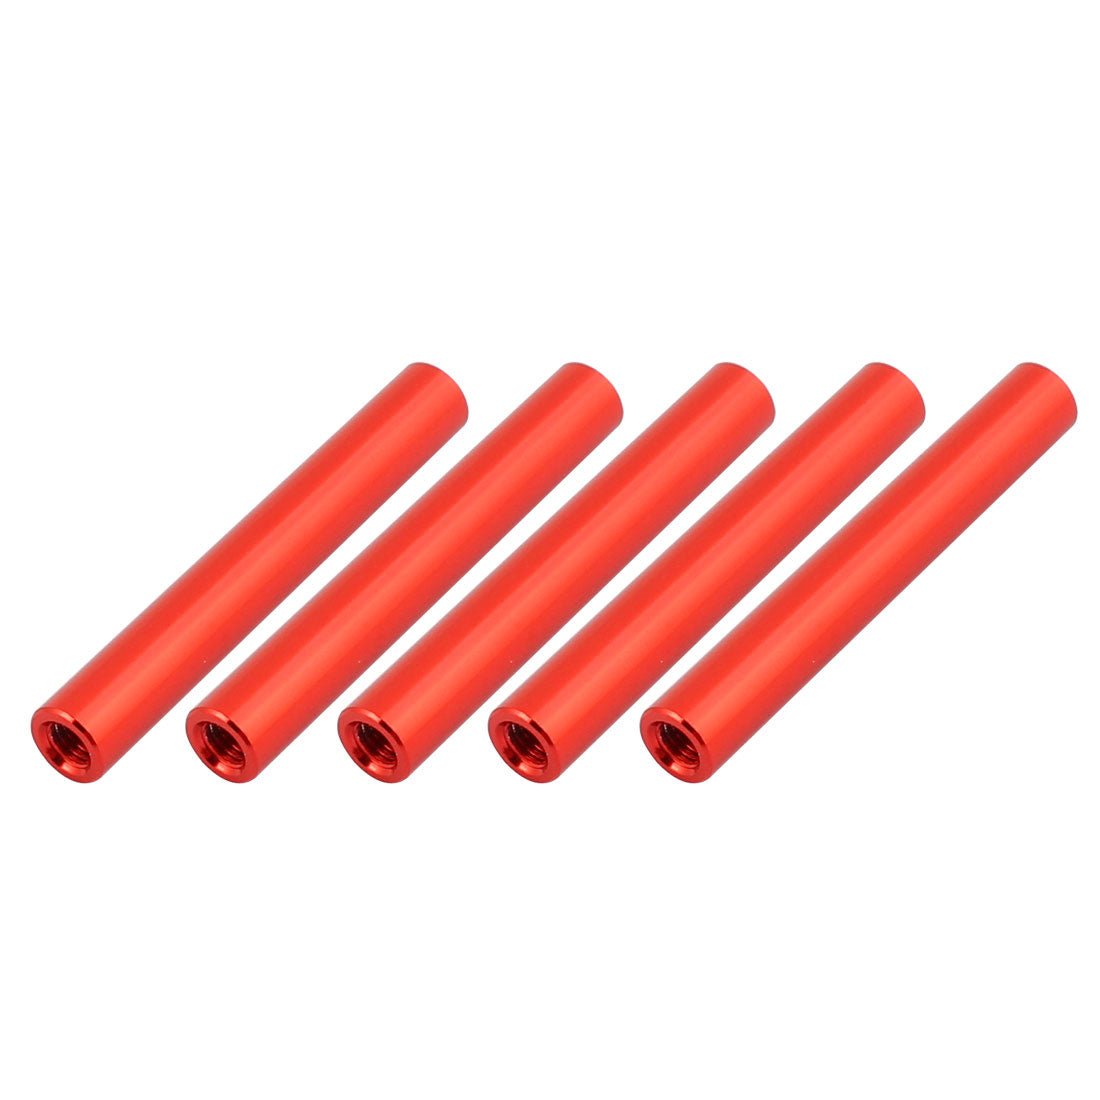 Uxcell Uxcell 5 Pcs M3 x 35mm Round Aluminum Column Alloy Standoff Spacer Stud Fastener for Quadcopter Red